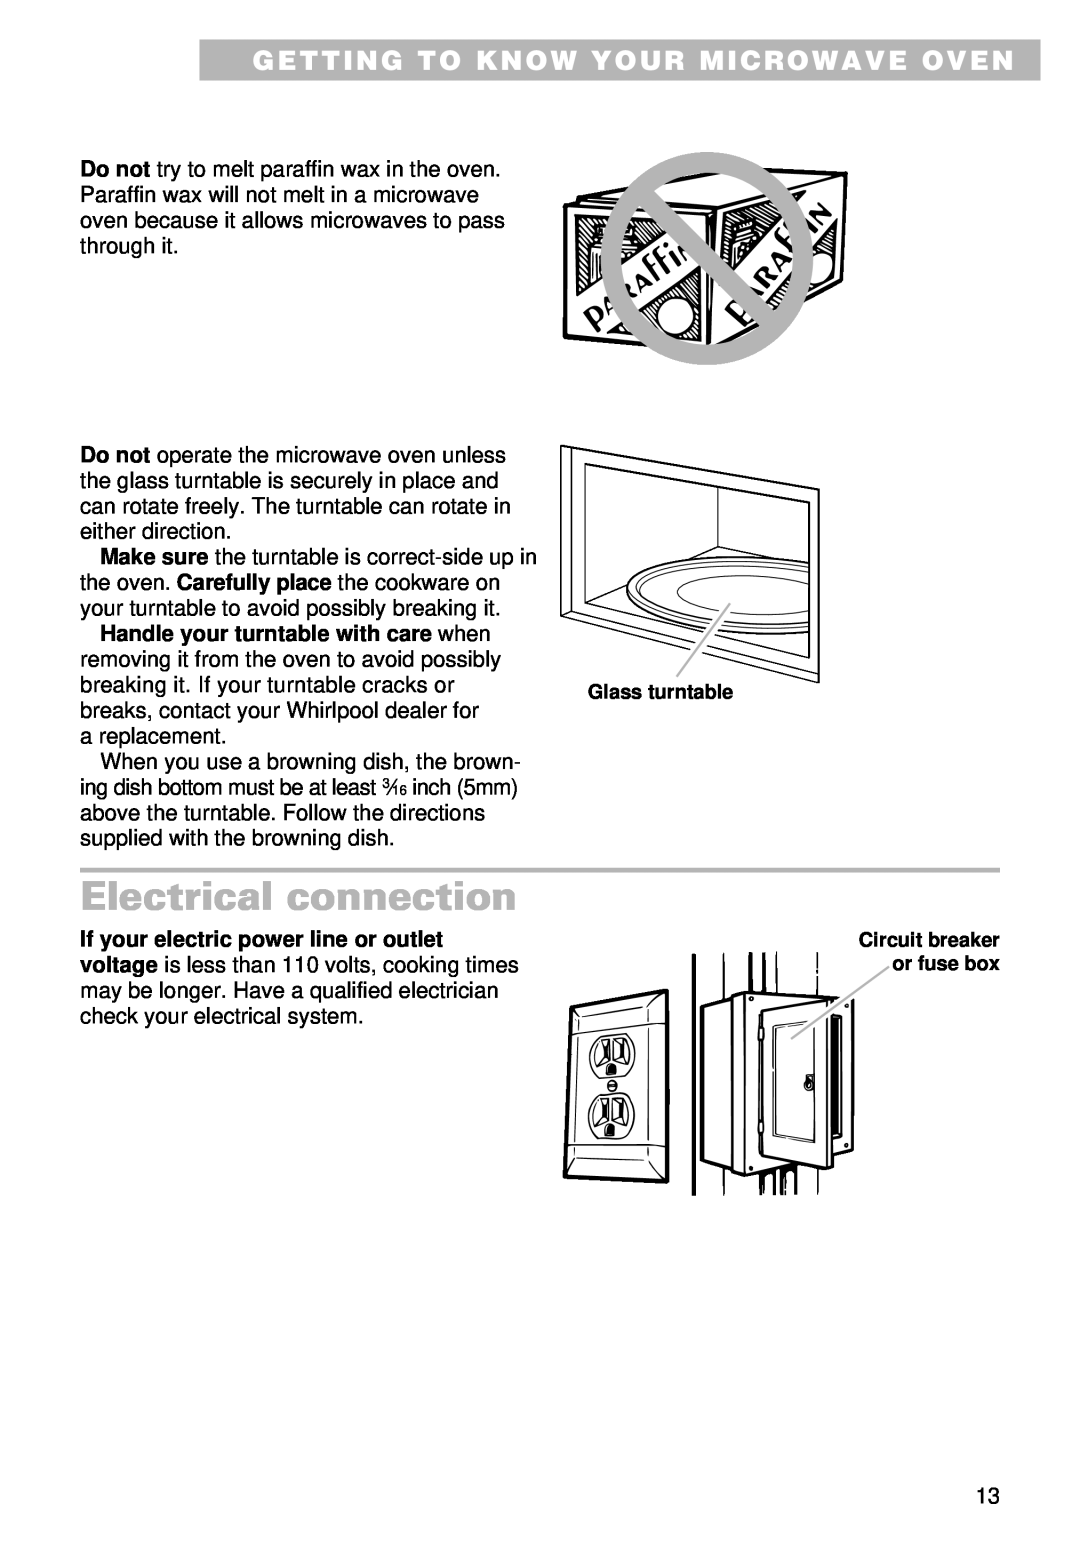 Whirlpool YMT9102SF, YMT9092SF installation instructions Electrical connection, Getting To Know Your Microwave Oven 